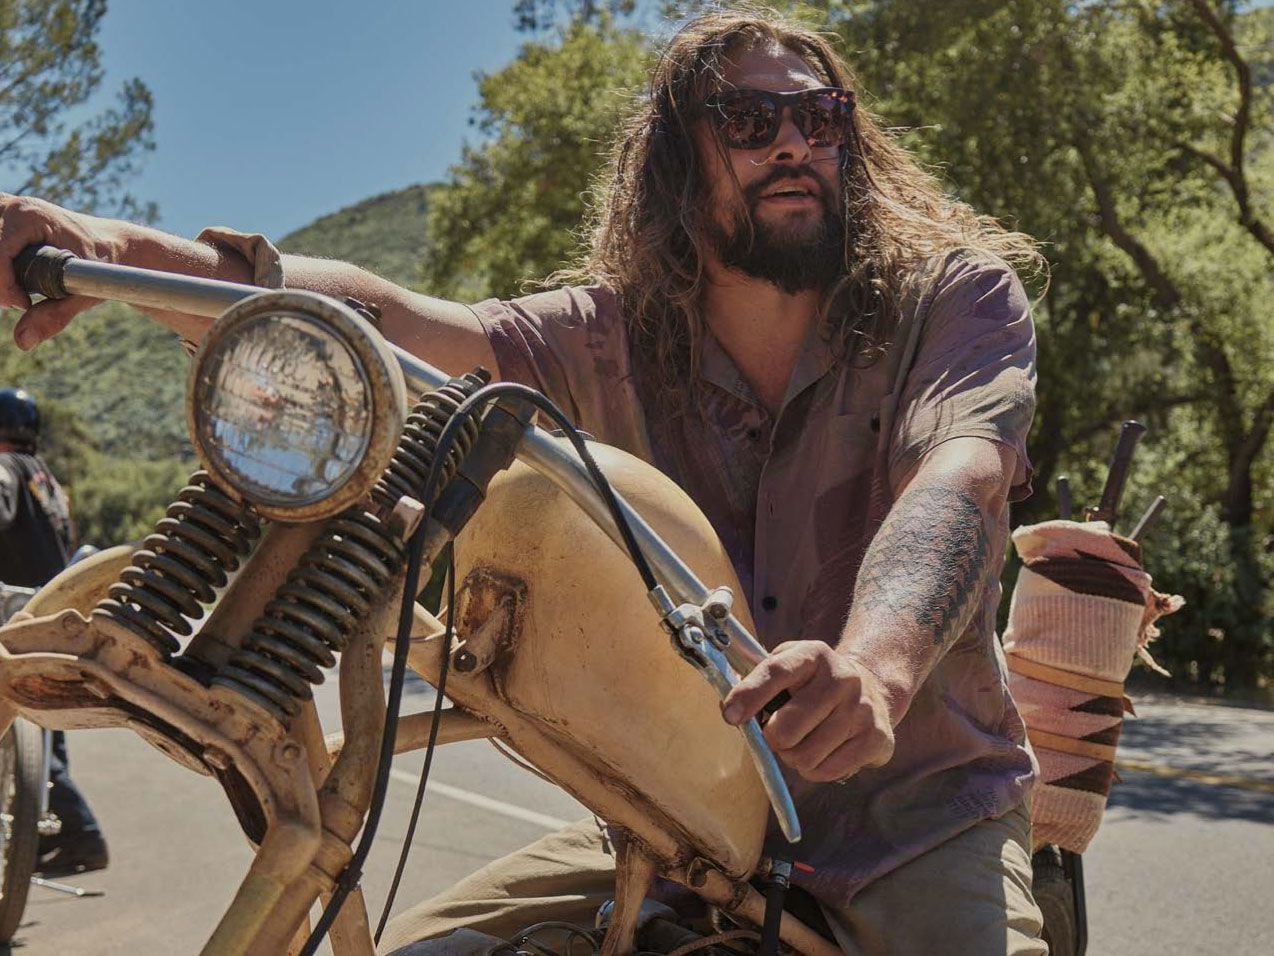 Jason Momoa posing aboard an Ironhead with a springer front end and peanut tank.